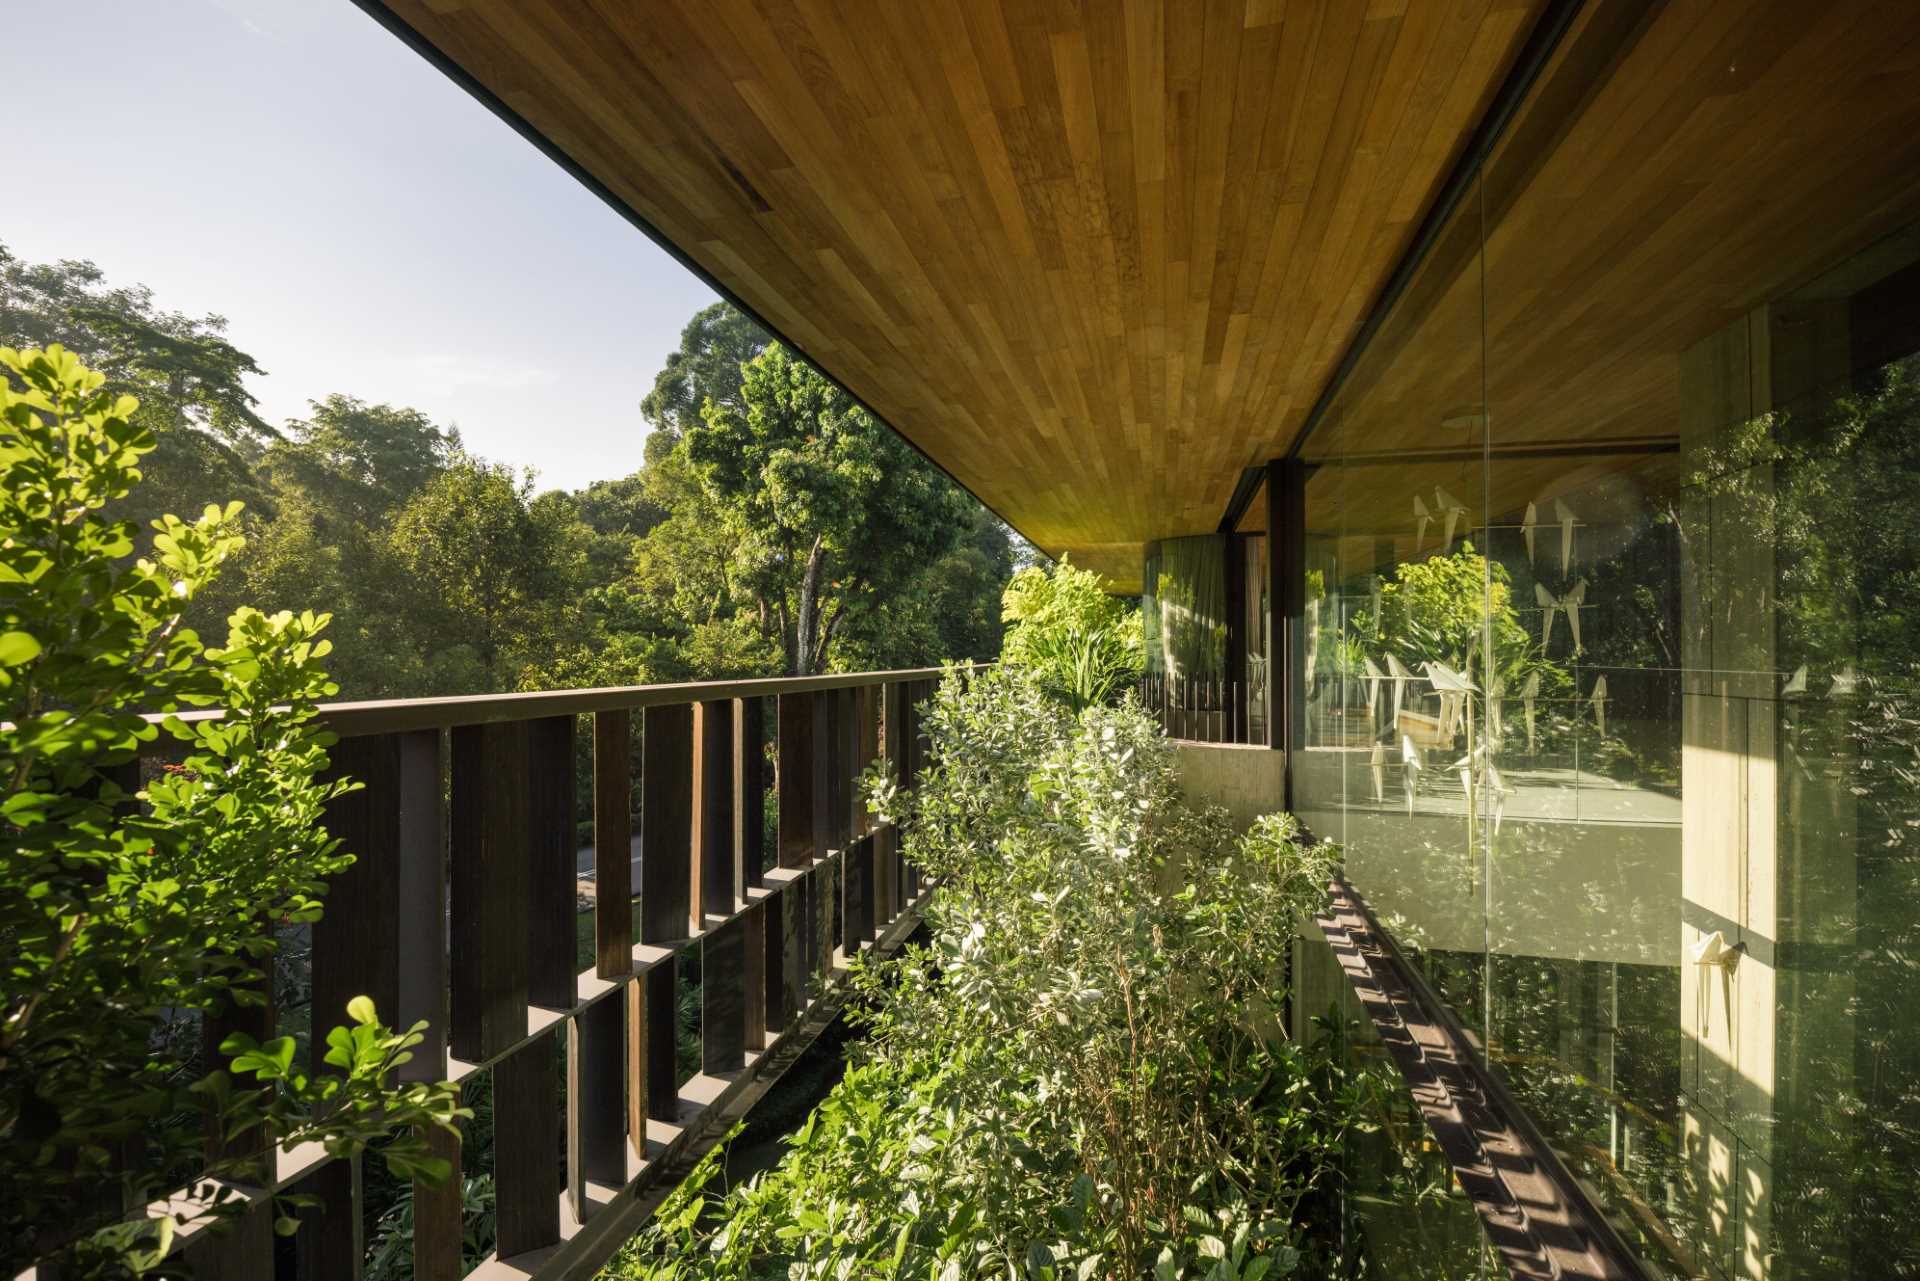 A modern house that has plants and shade screens integrated into its design.